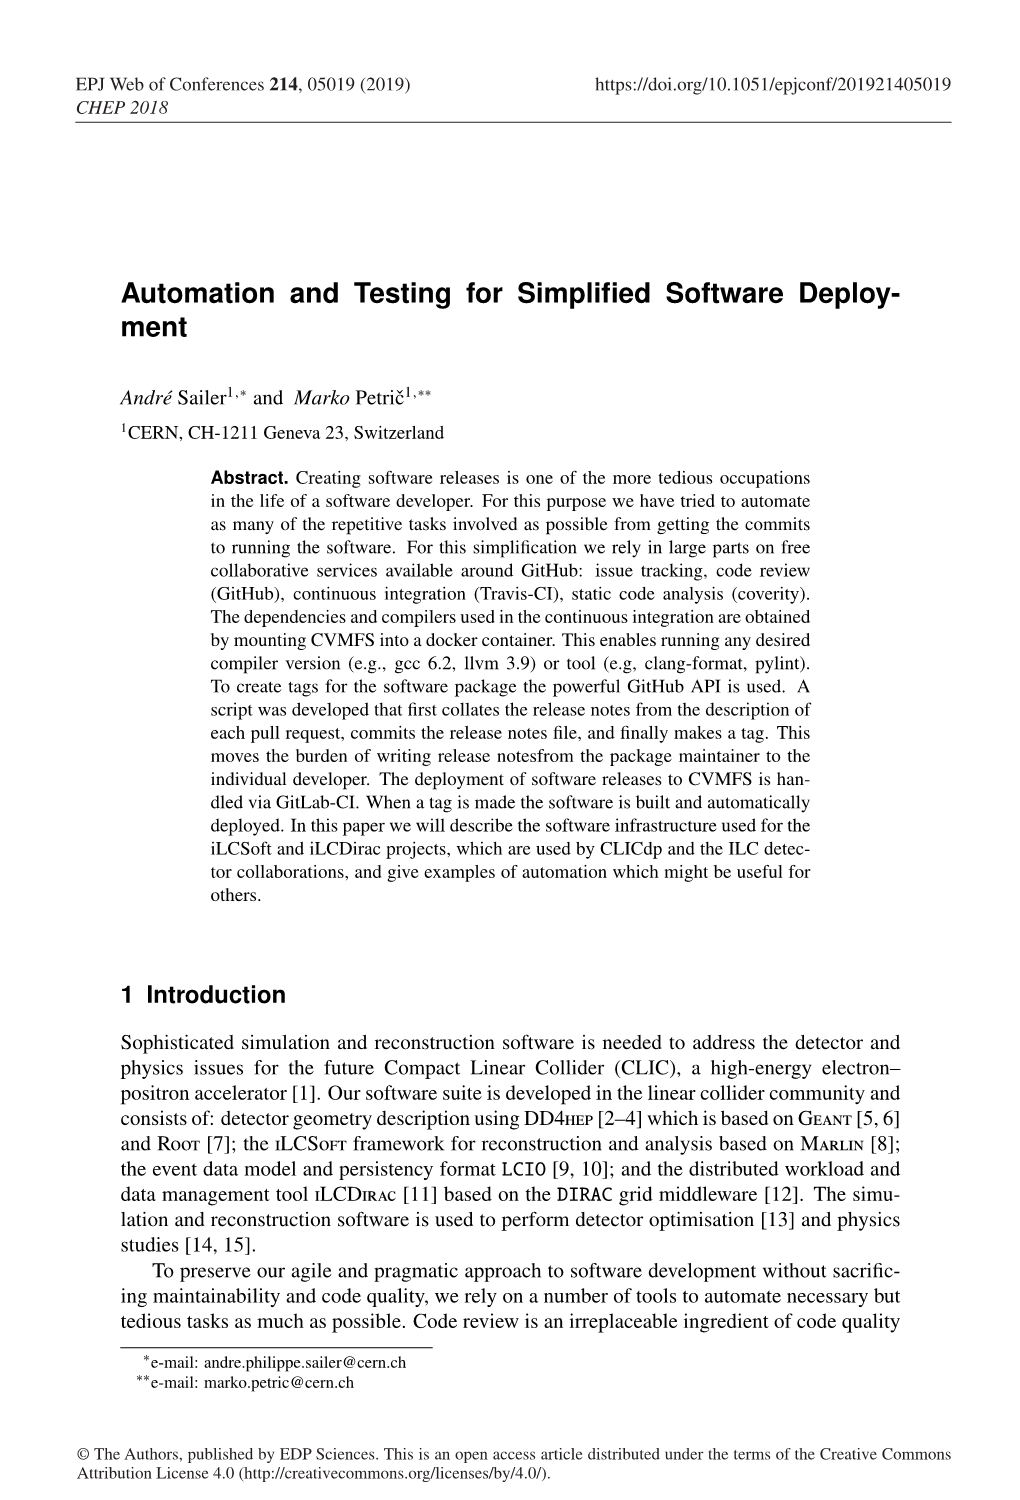 Automation and Testing for Simplified Software